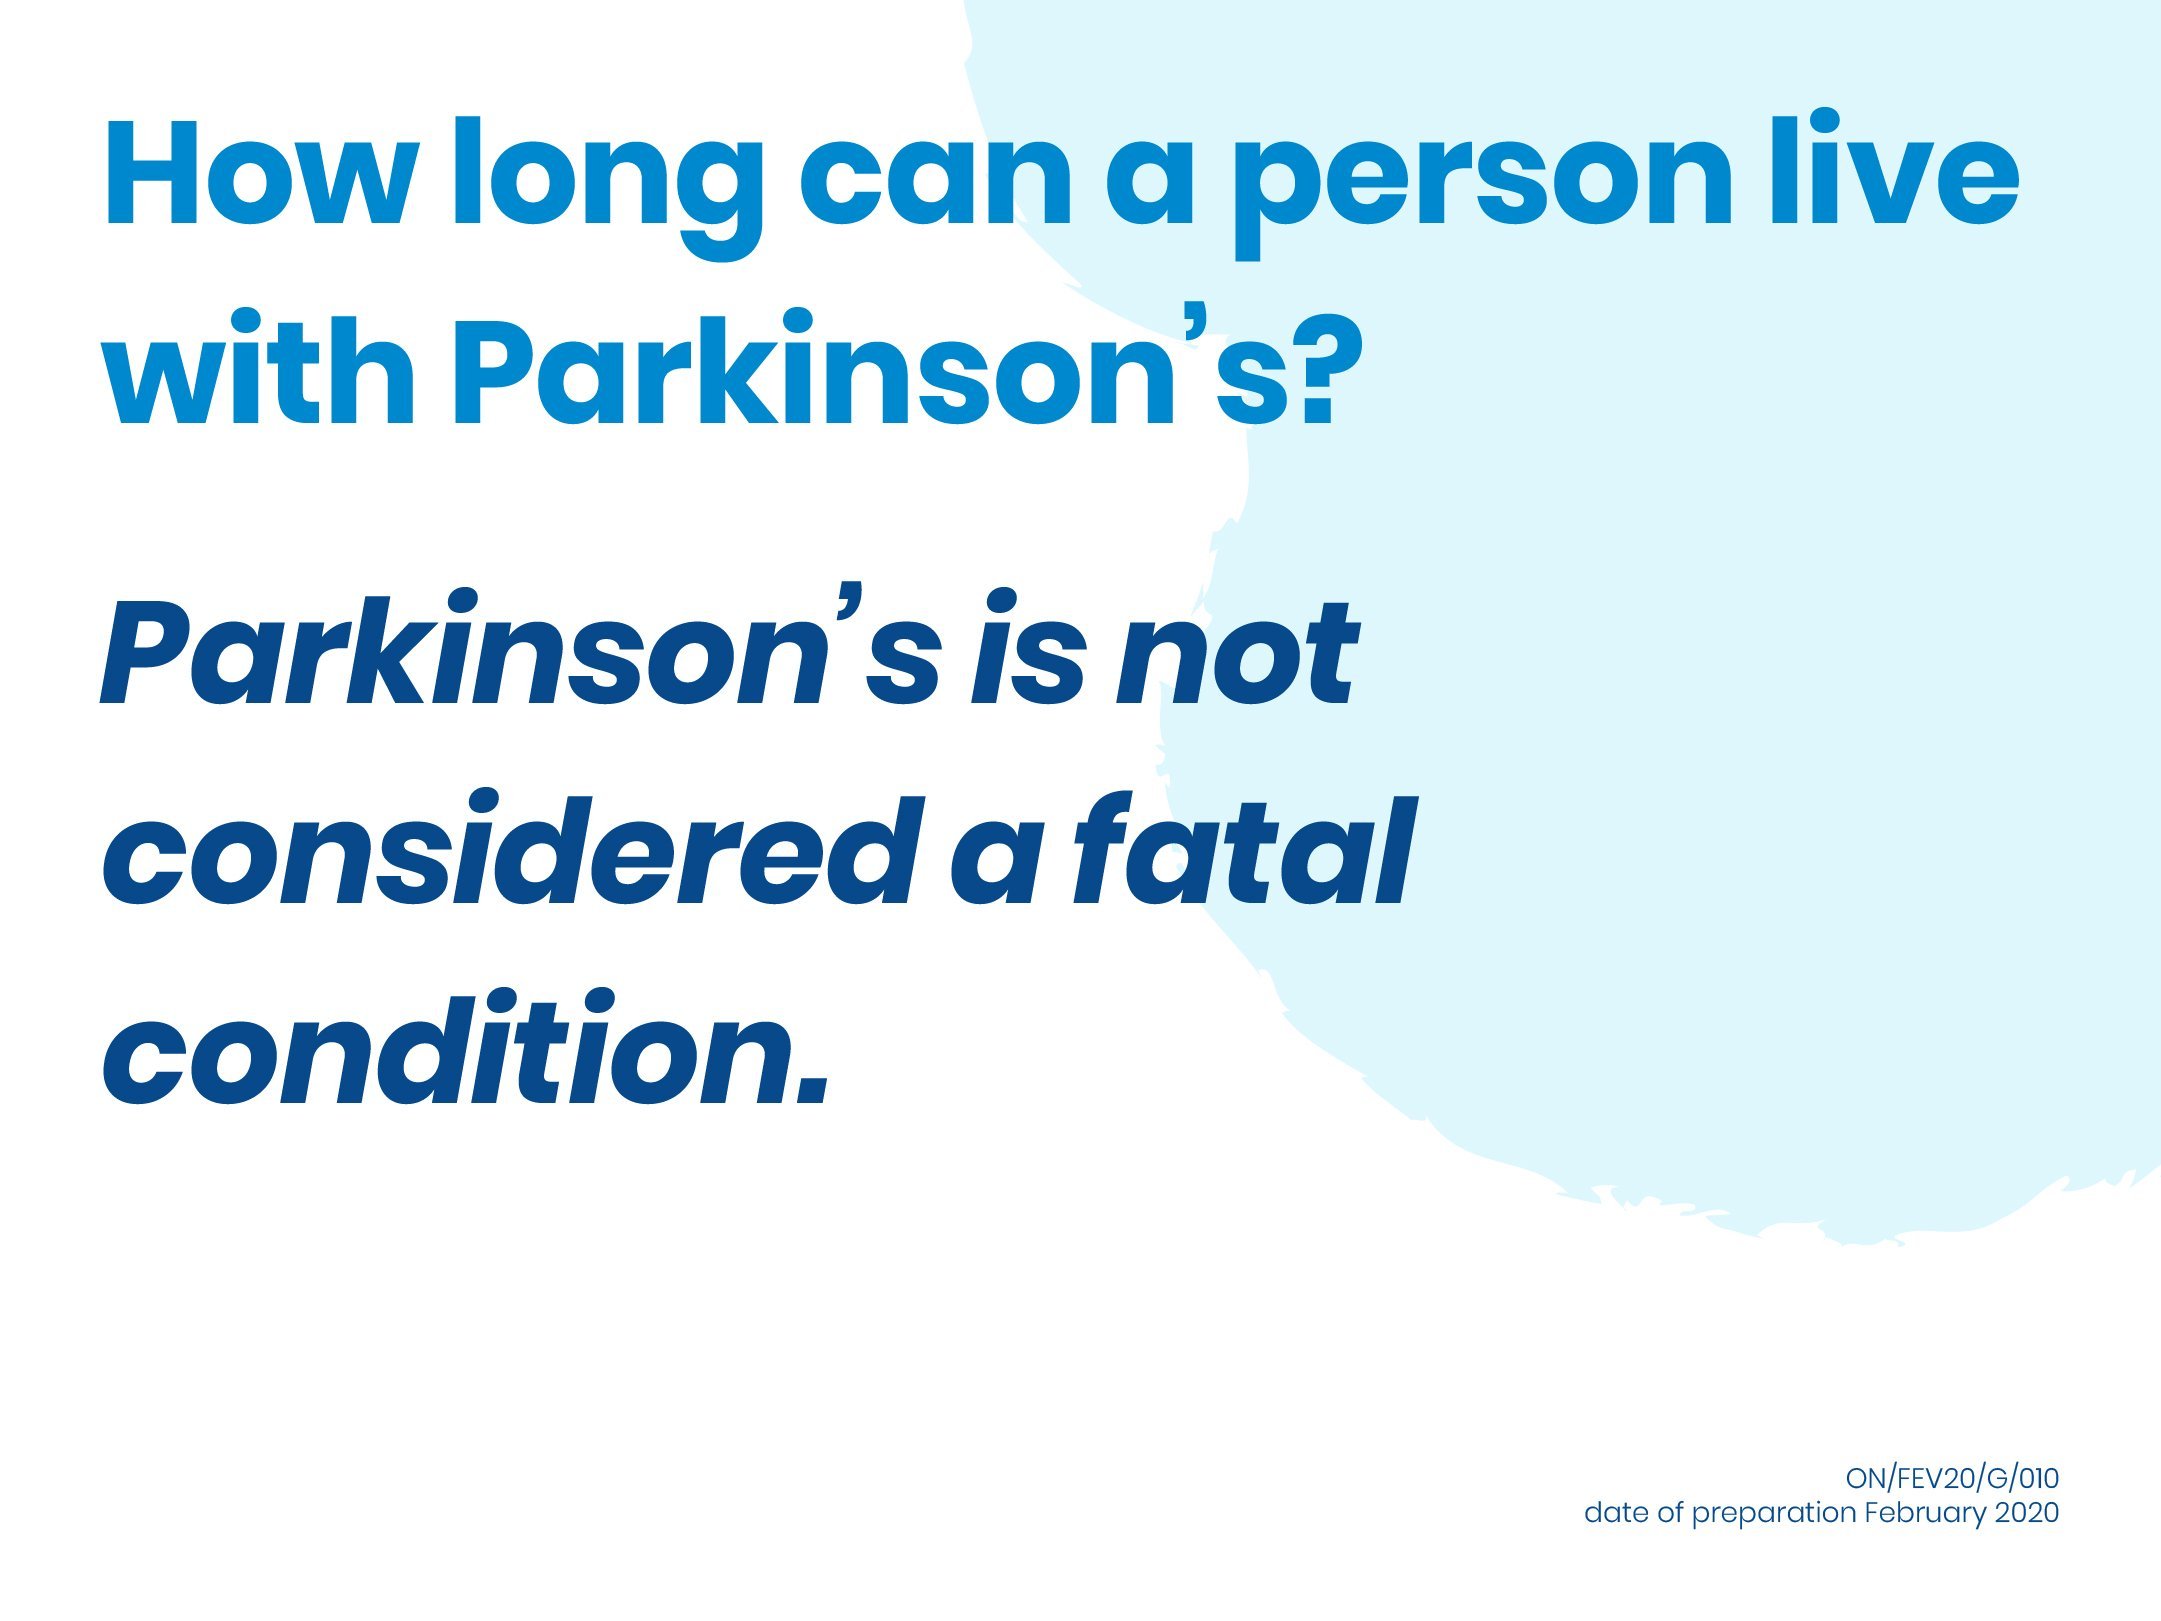 How long can patients live with Parkinson